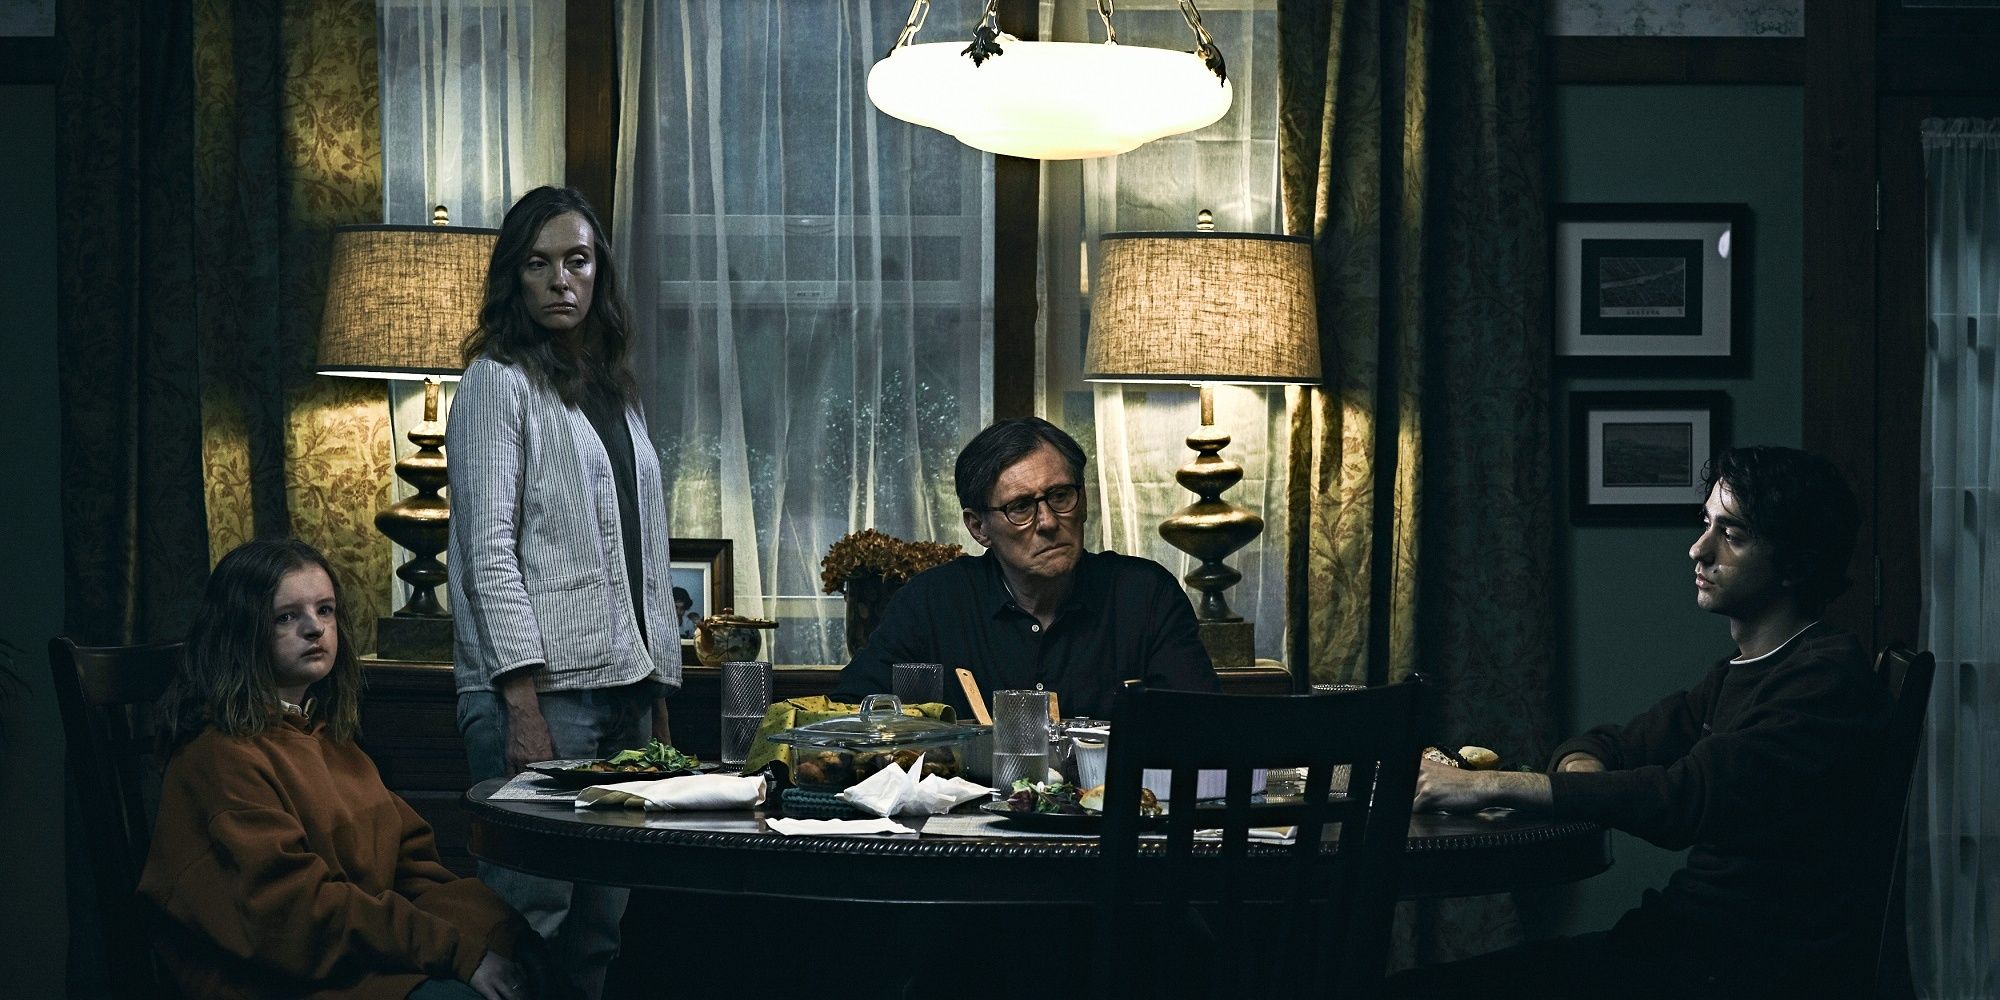 The Graham family looking sullen around the dinner table in 'Hereditary.'